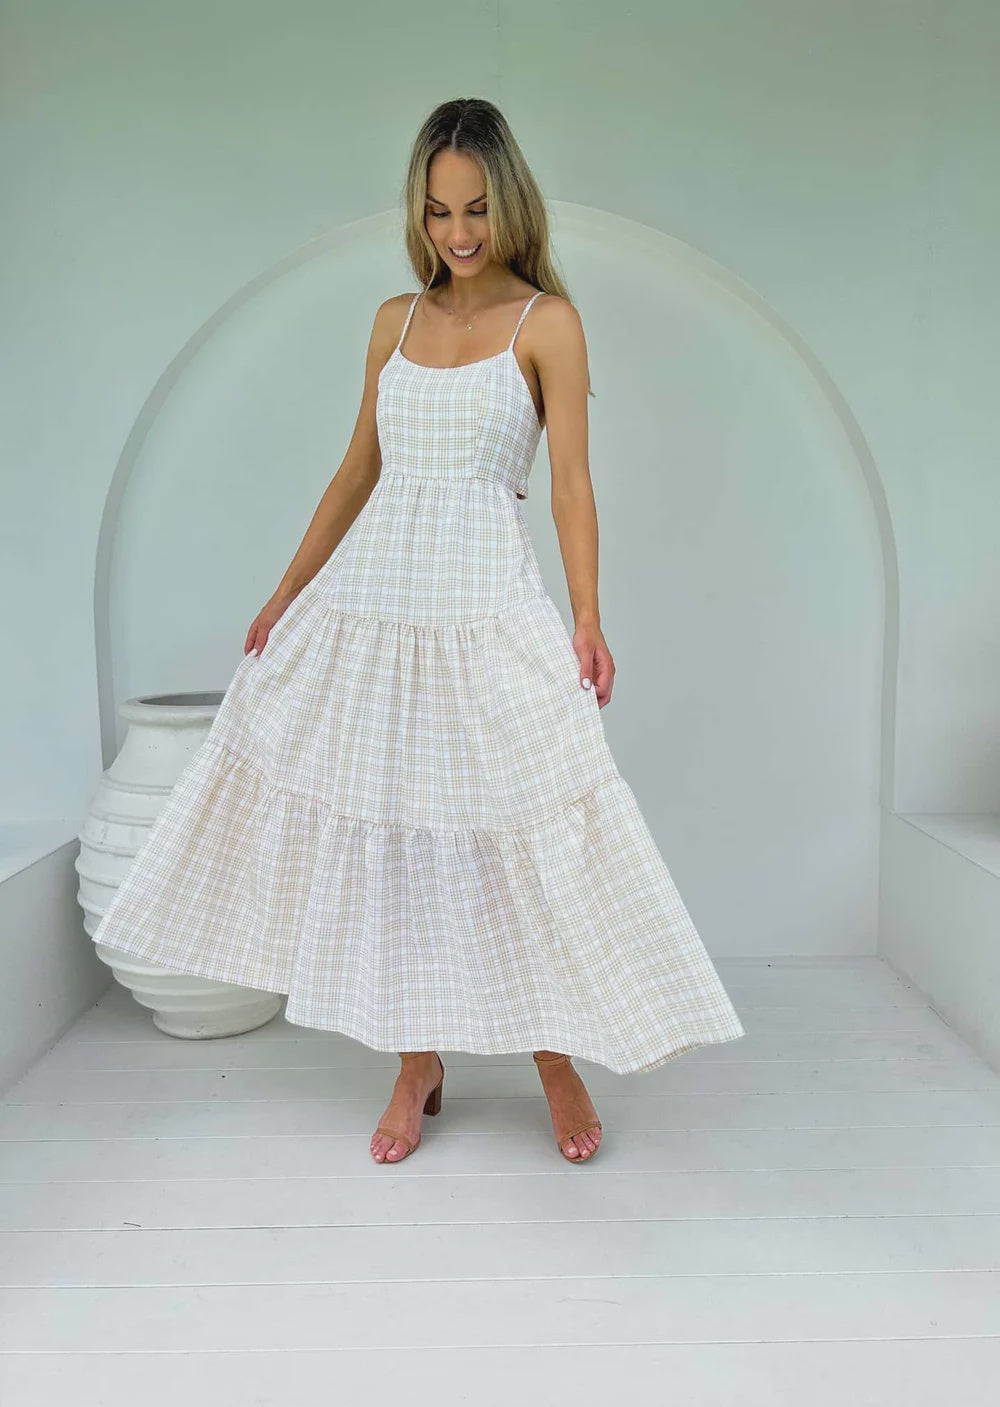 Jump into summer with this Georgie Gingham Maxi Dress! Featuring a tie around detail, spaghetti straps and a low back, this eye-catching dress is guaranteed to turn heads and have you feeling your gingham-ous best!